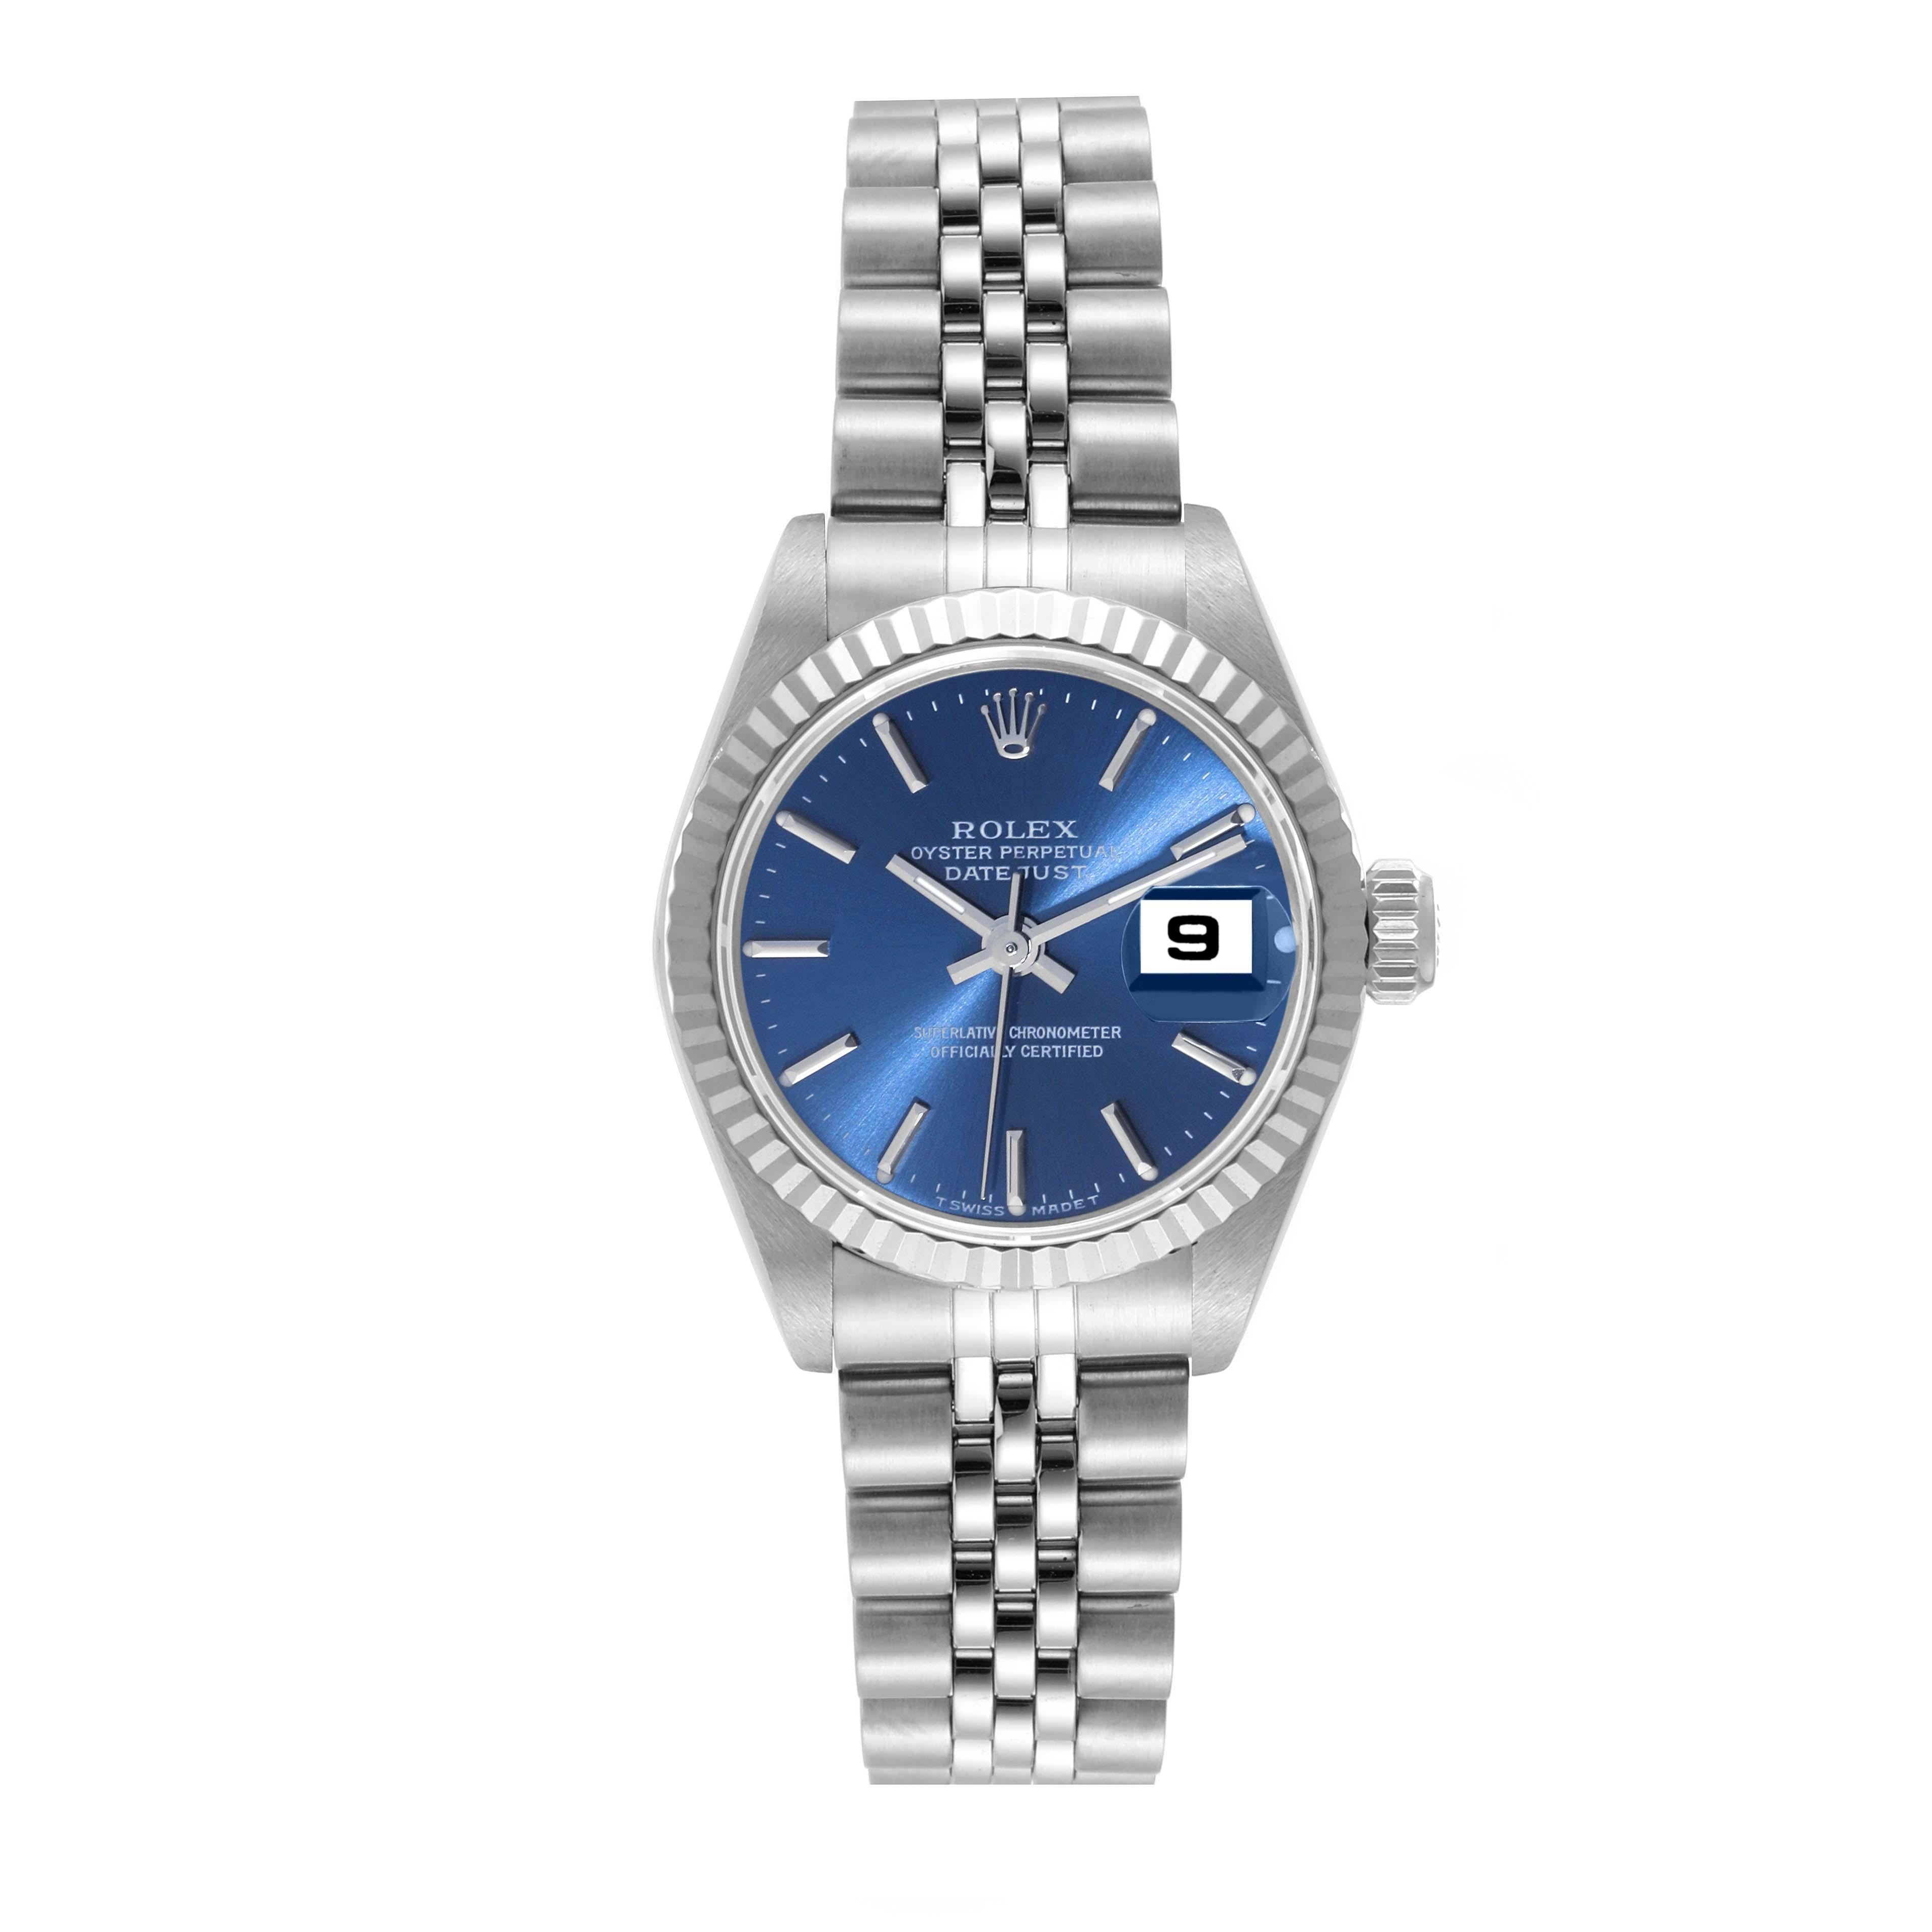 Rolex Datejust Steel White Gold Blue Dial Ladies Watch 69174. Officially certified chronometer automatic self-winding movement. Stainless steel oyster case 26 mm in diameter. Rolex logo on a crown. 18k white gold fluted bezel. Scratch resistant